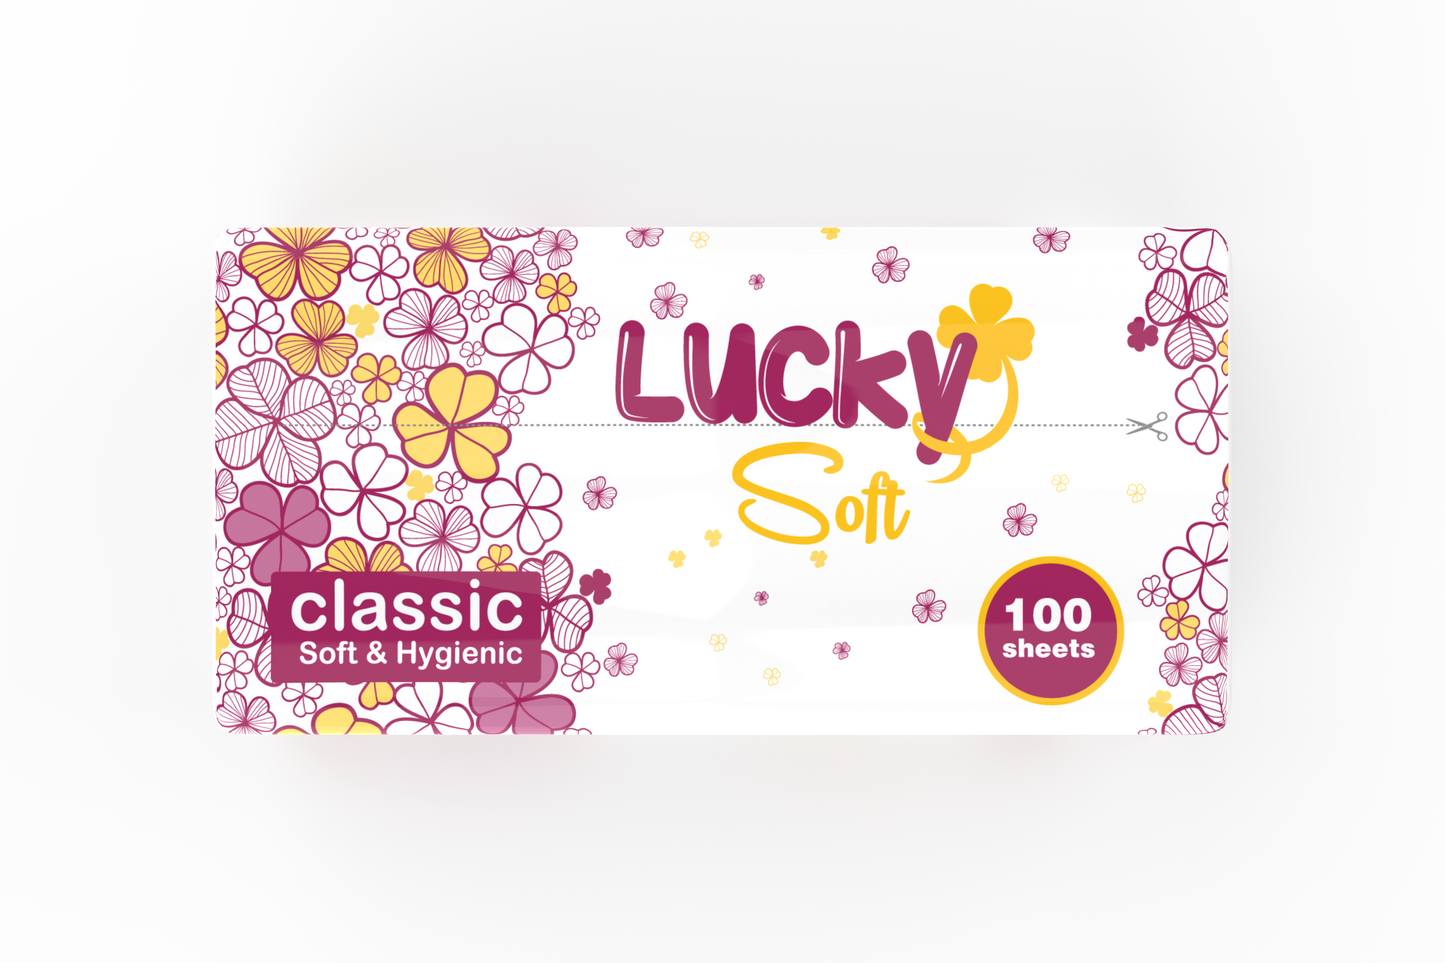 LUCKY SOFT CLASSIC FACIAL TISSUES (700g)